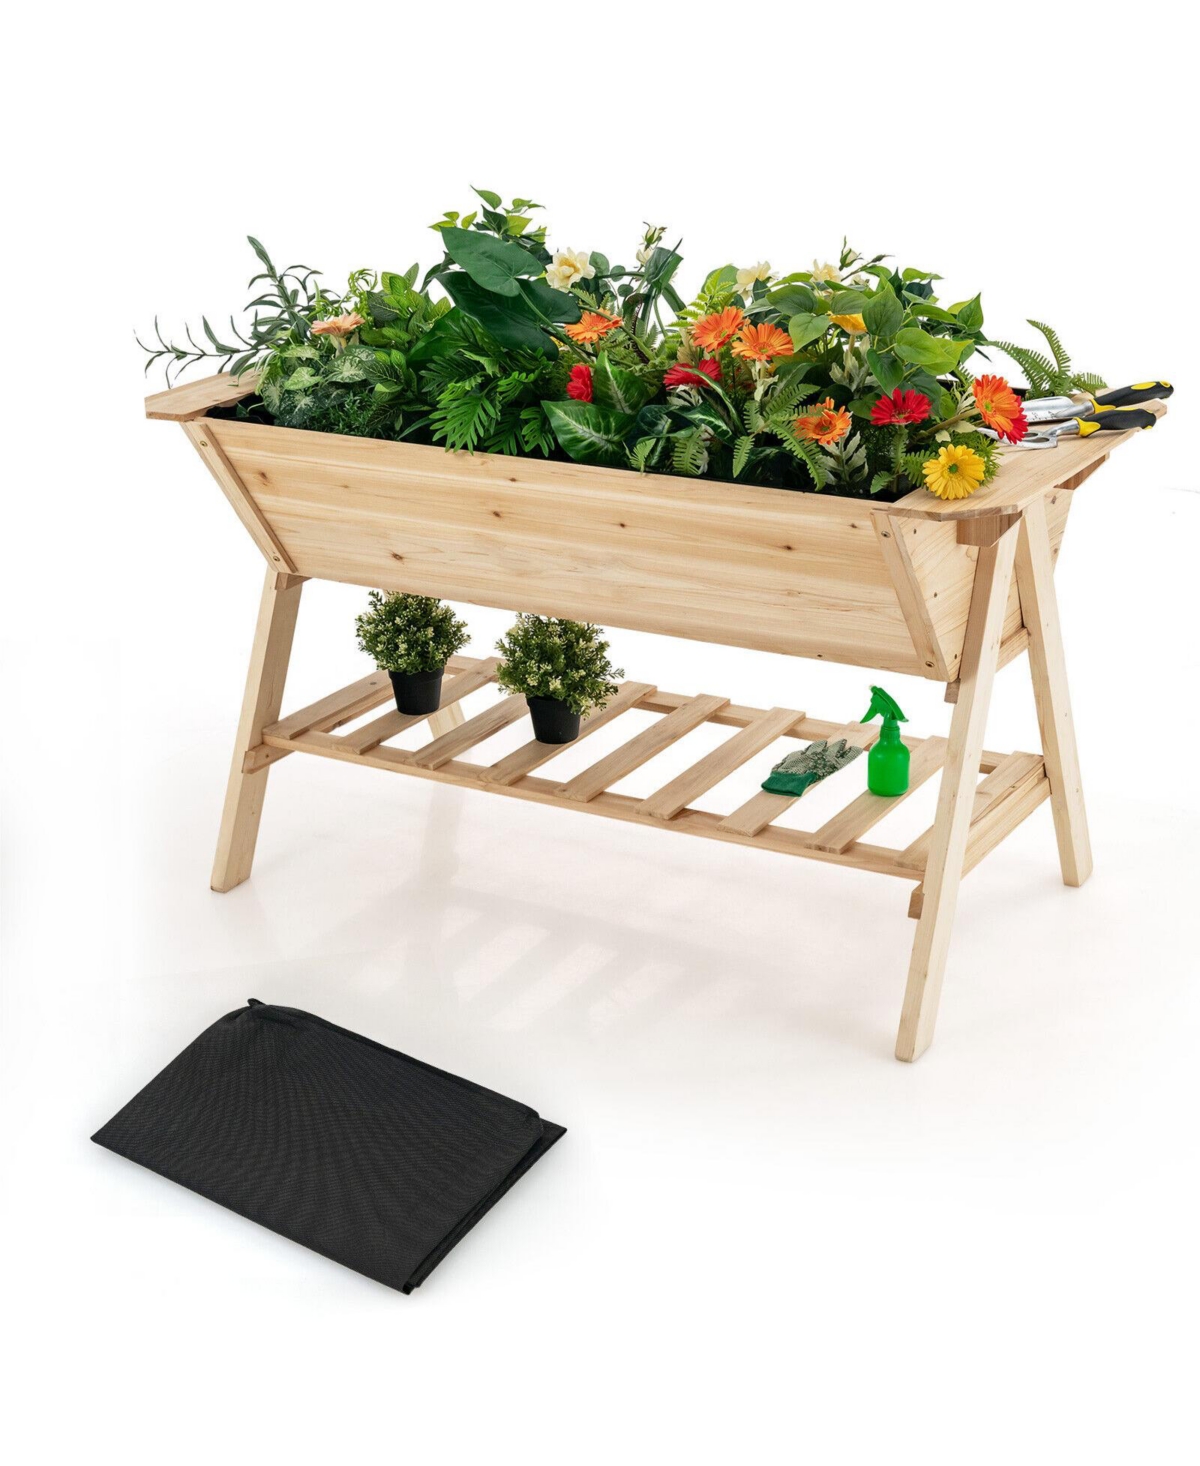 Raised Wood Garden Bed with Shelf and Liner - Natural